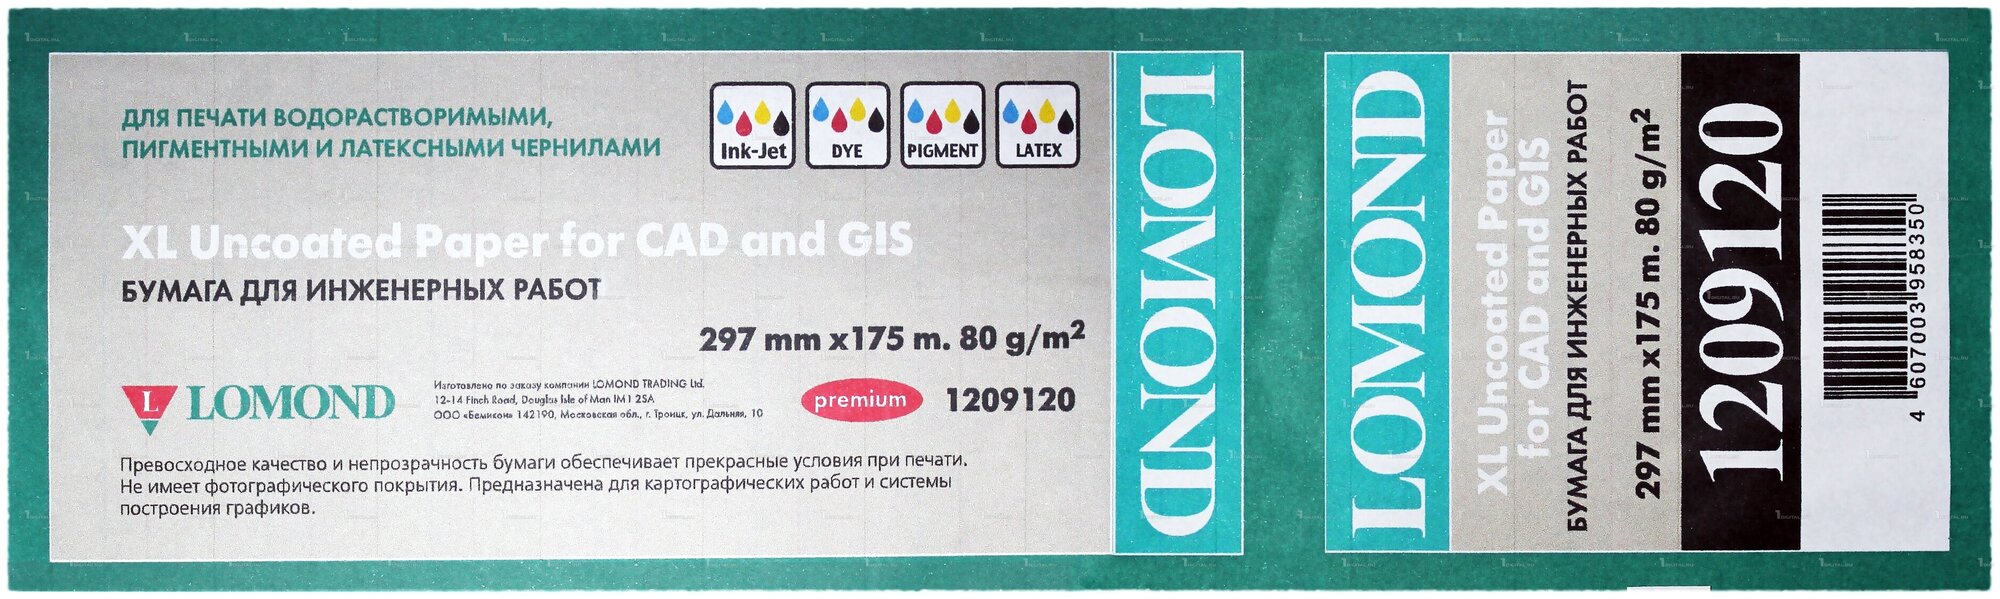 Бумага Lomond 297 XL Uncoated Paper for CAD and GIS 1209120 80 г/м² 175 м